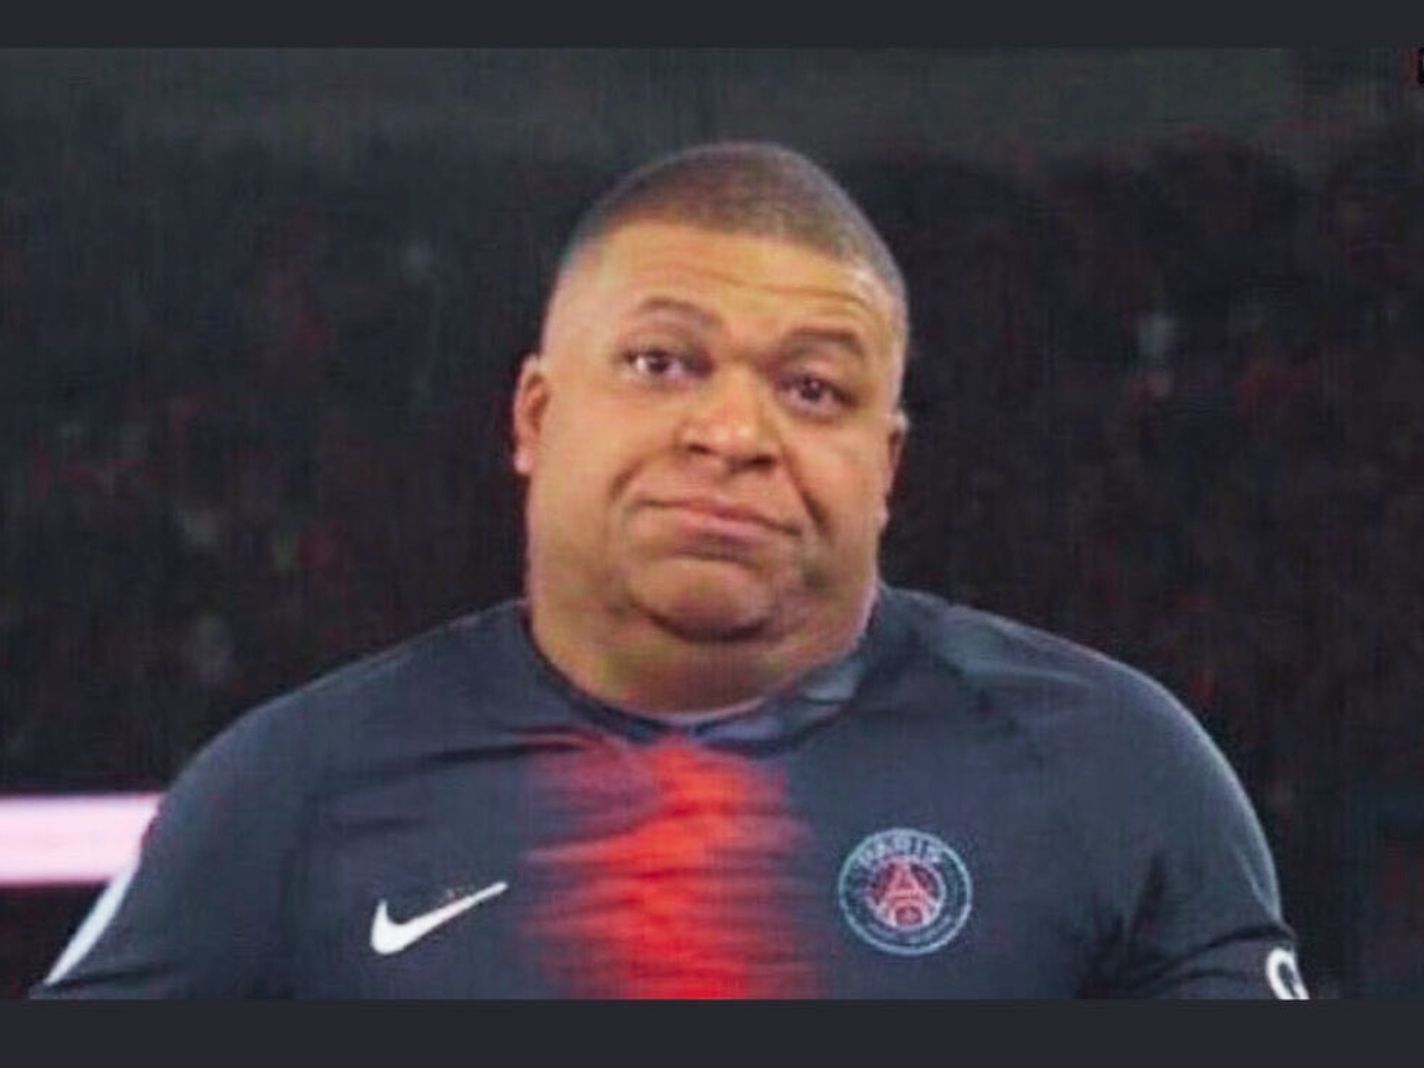 Edited image imagines what Kylian Mbappe would look like if he was fat